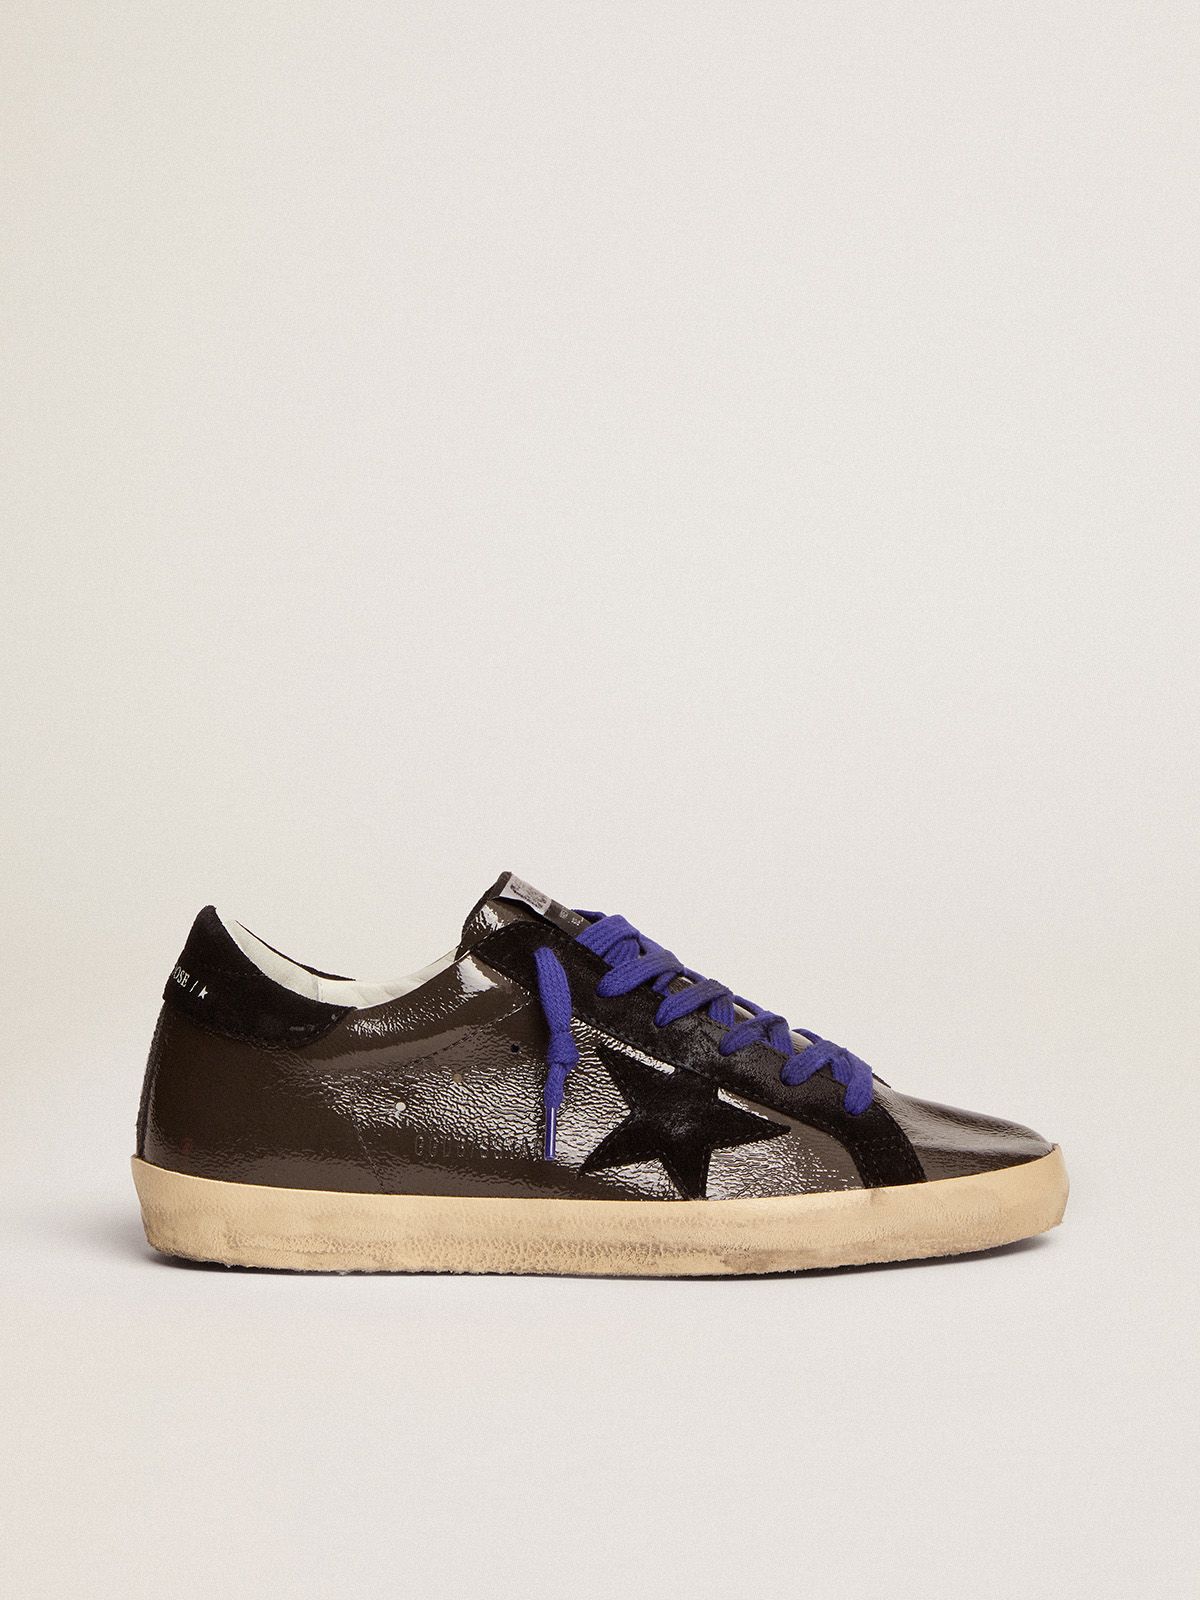 Sneakers Uomo Golden Goose Super-Star sneakers in gray patent leather with black suede inserts